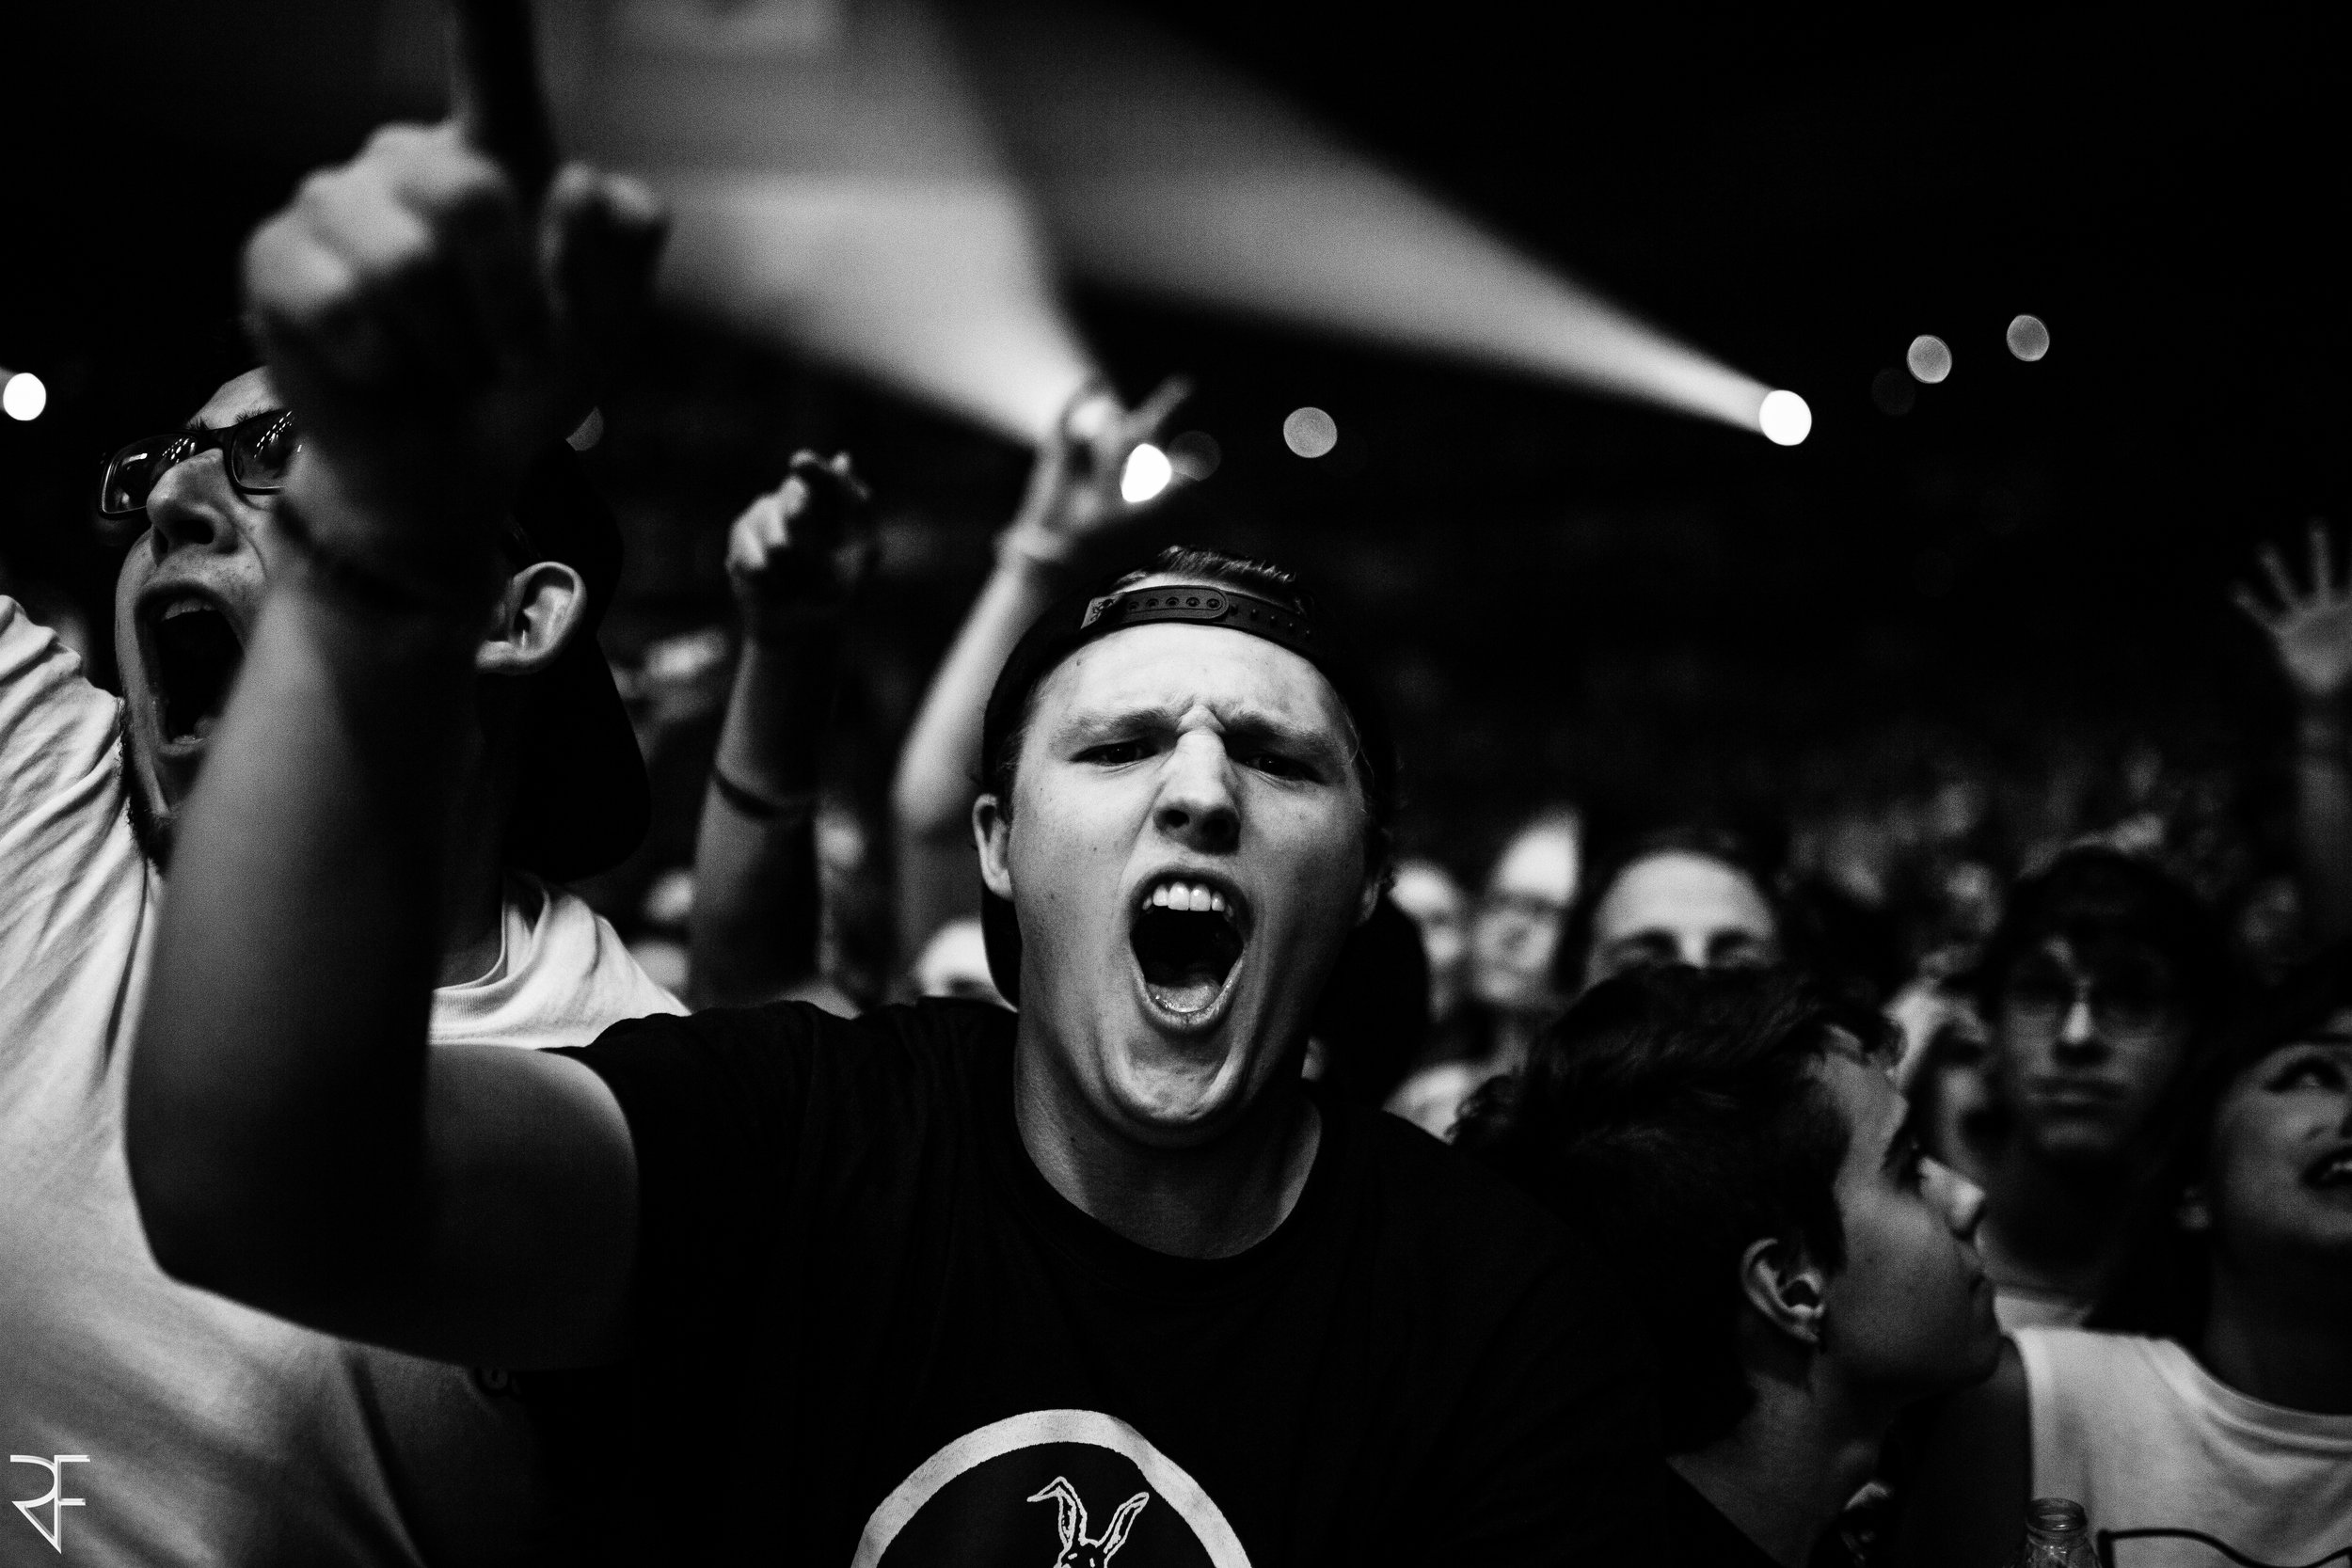  Shot of a fan during A Day To Remember. Happy fans fully into the show is whats its all about.&nbsp; 